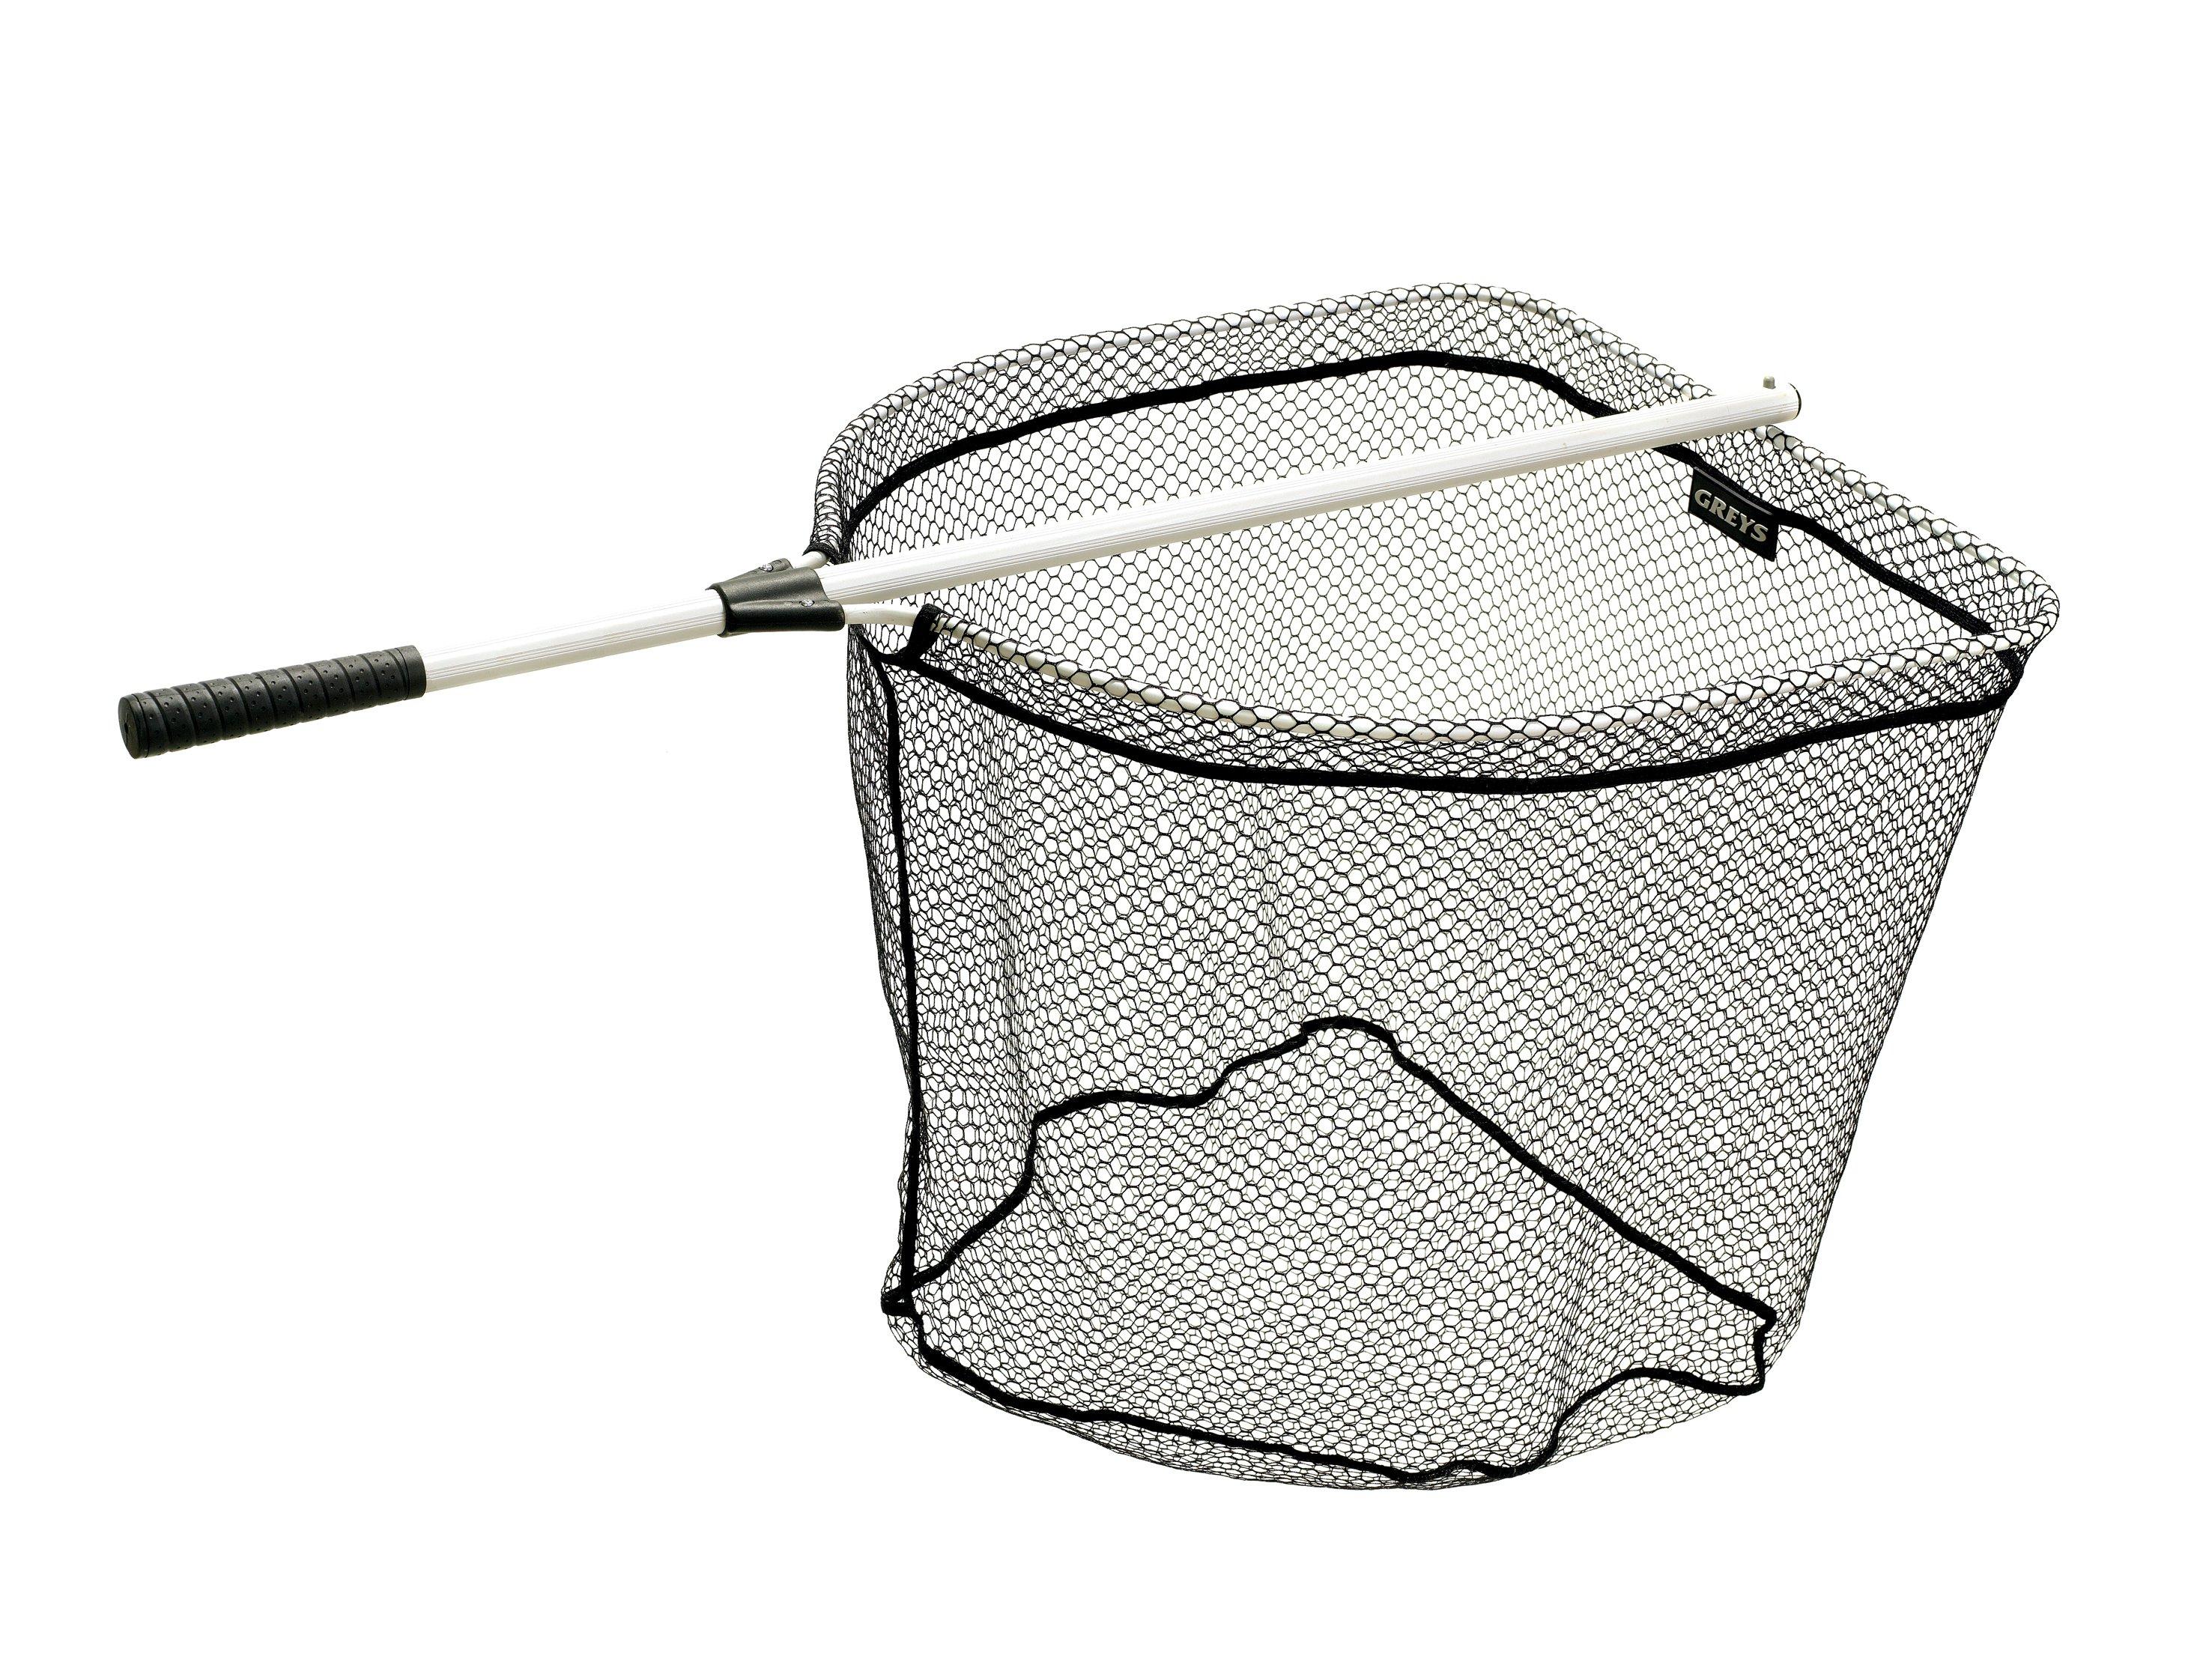 Greys GS Scoop trout landing net LARGE Fly fishing tackle 